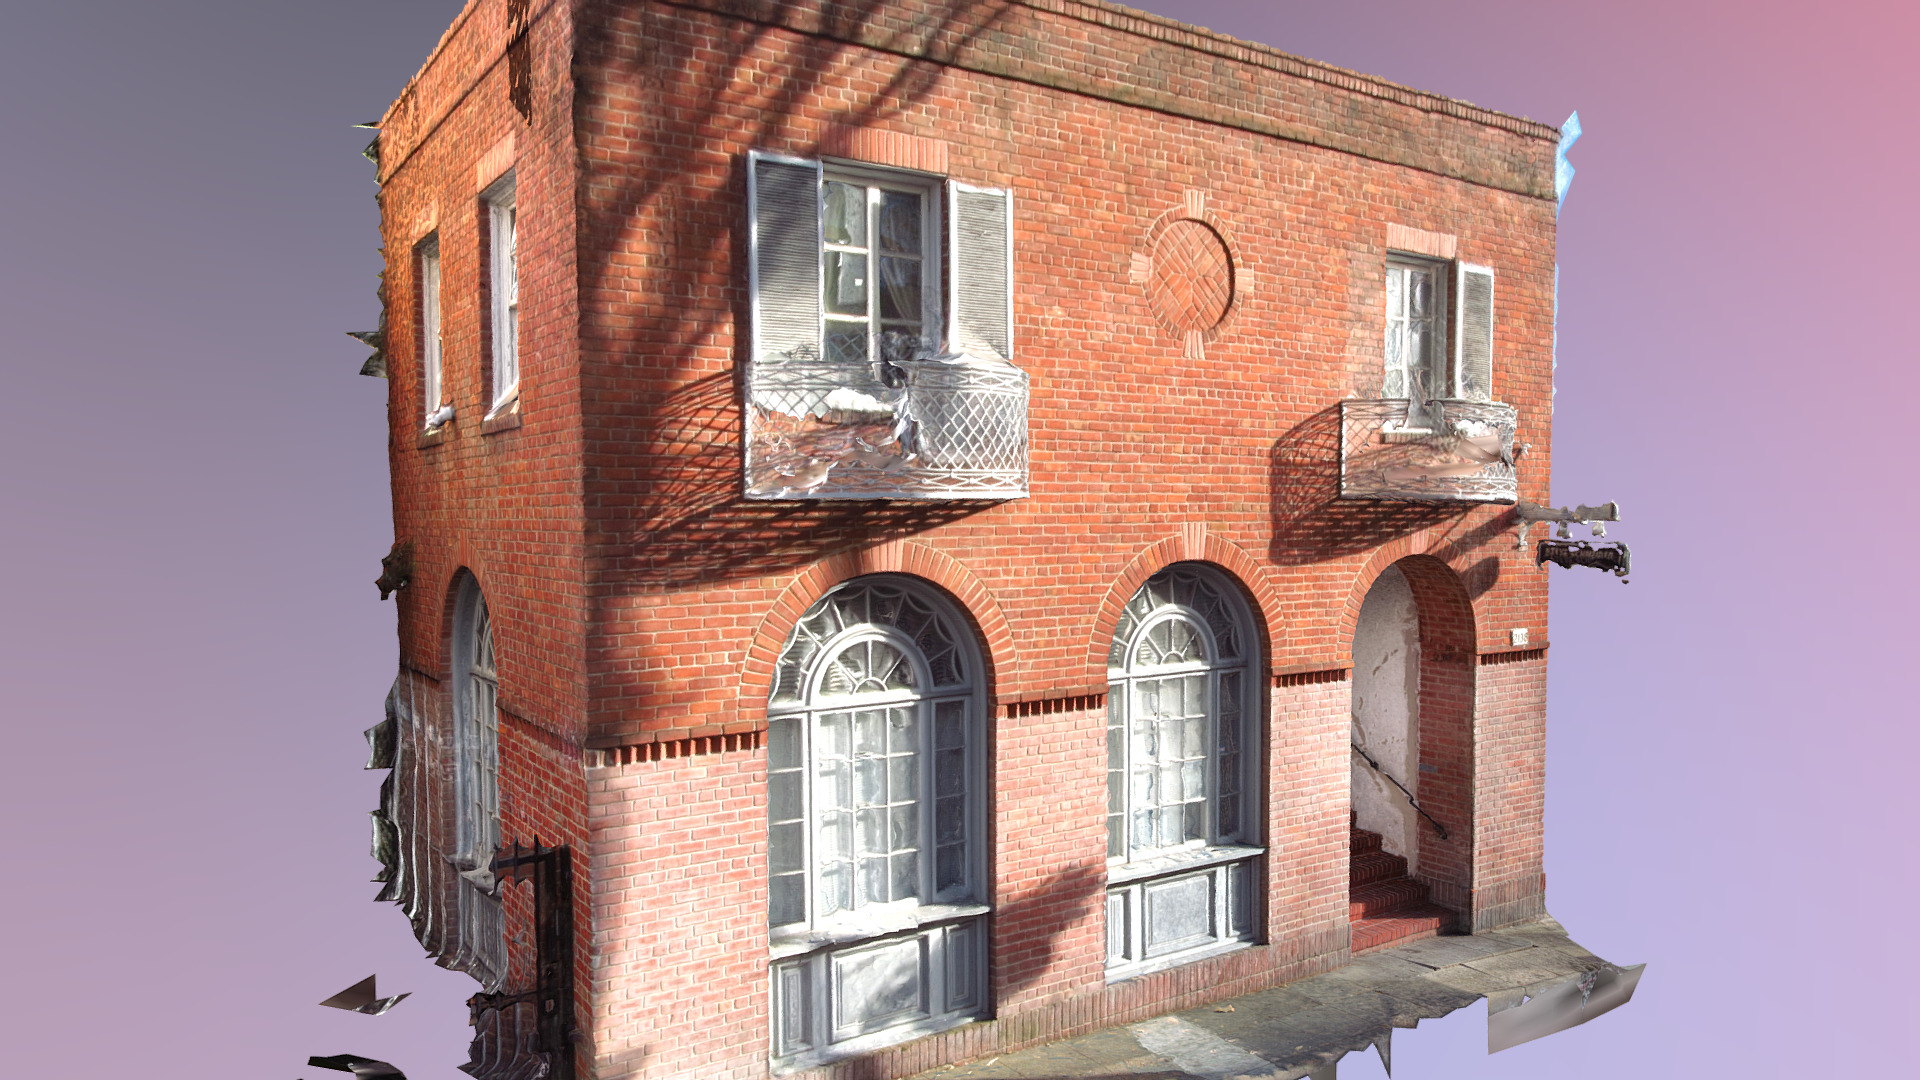 3D model Berkely California Brickhouse - This is a 3D model of the Berkely California Brickhouse. The 3D model is about a brick building with windows.